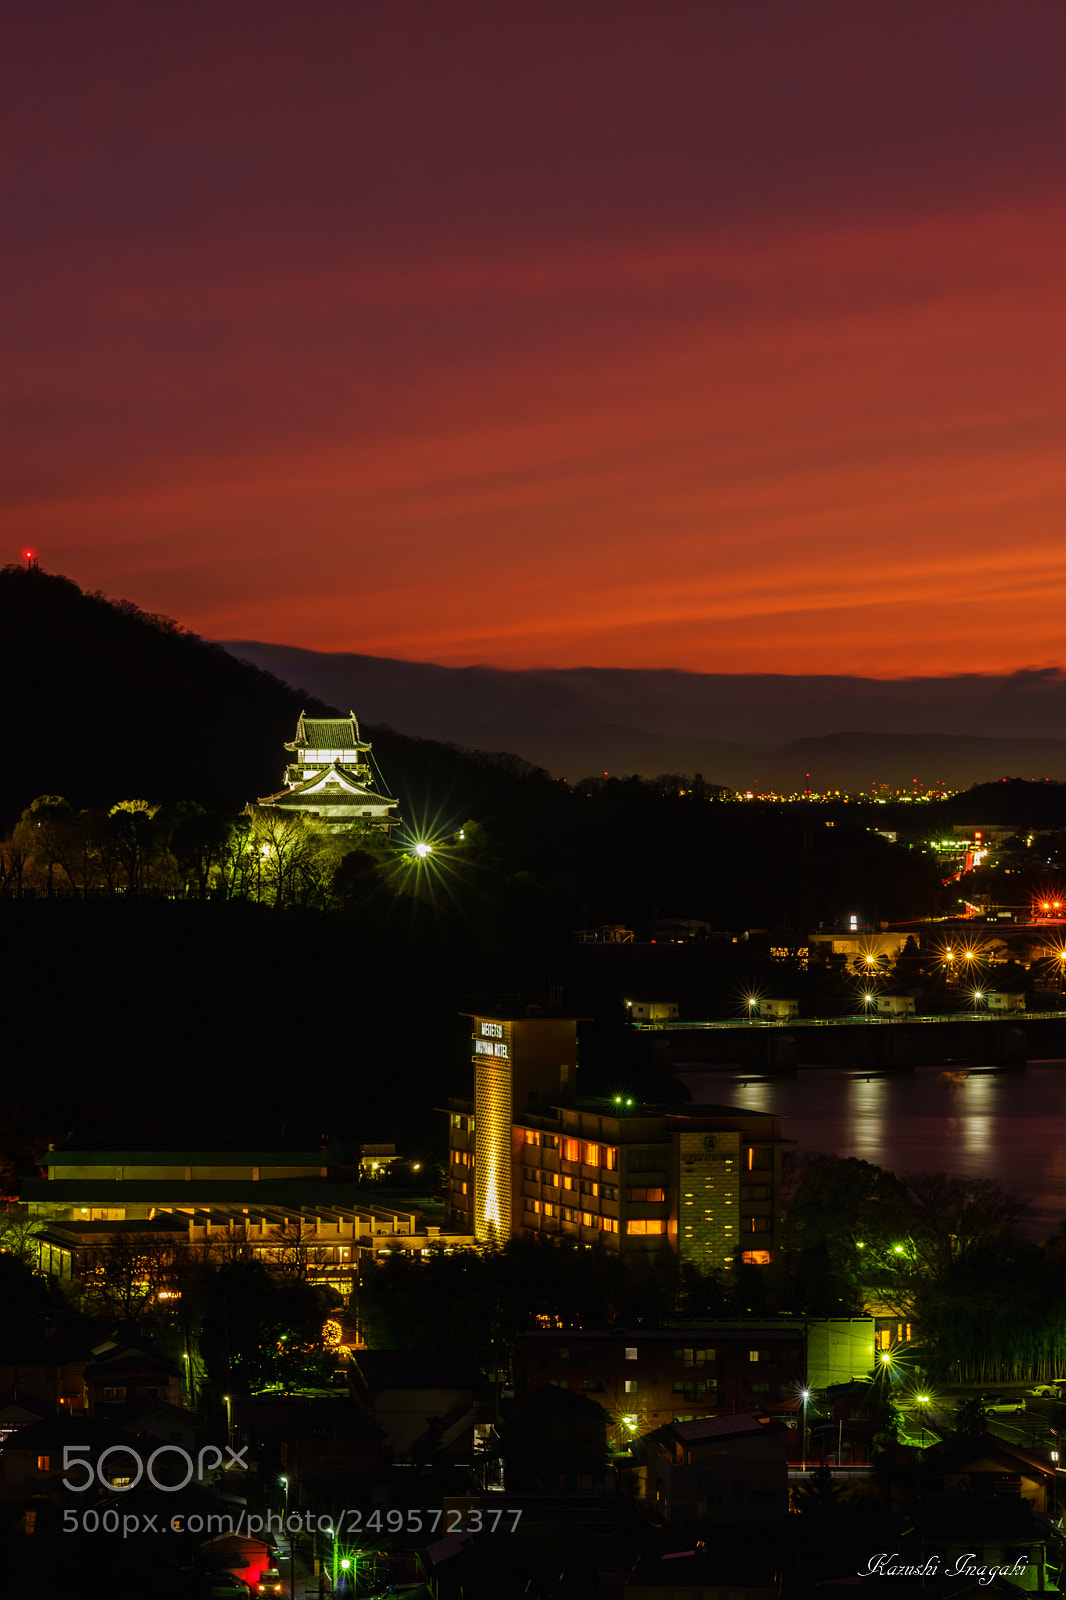 Sony a99 II sample photo. Evening view of inuyama photography